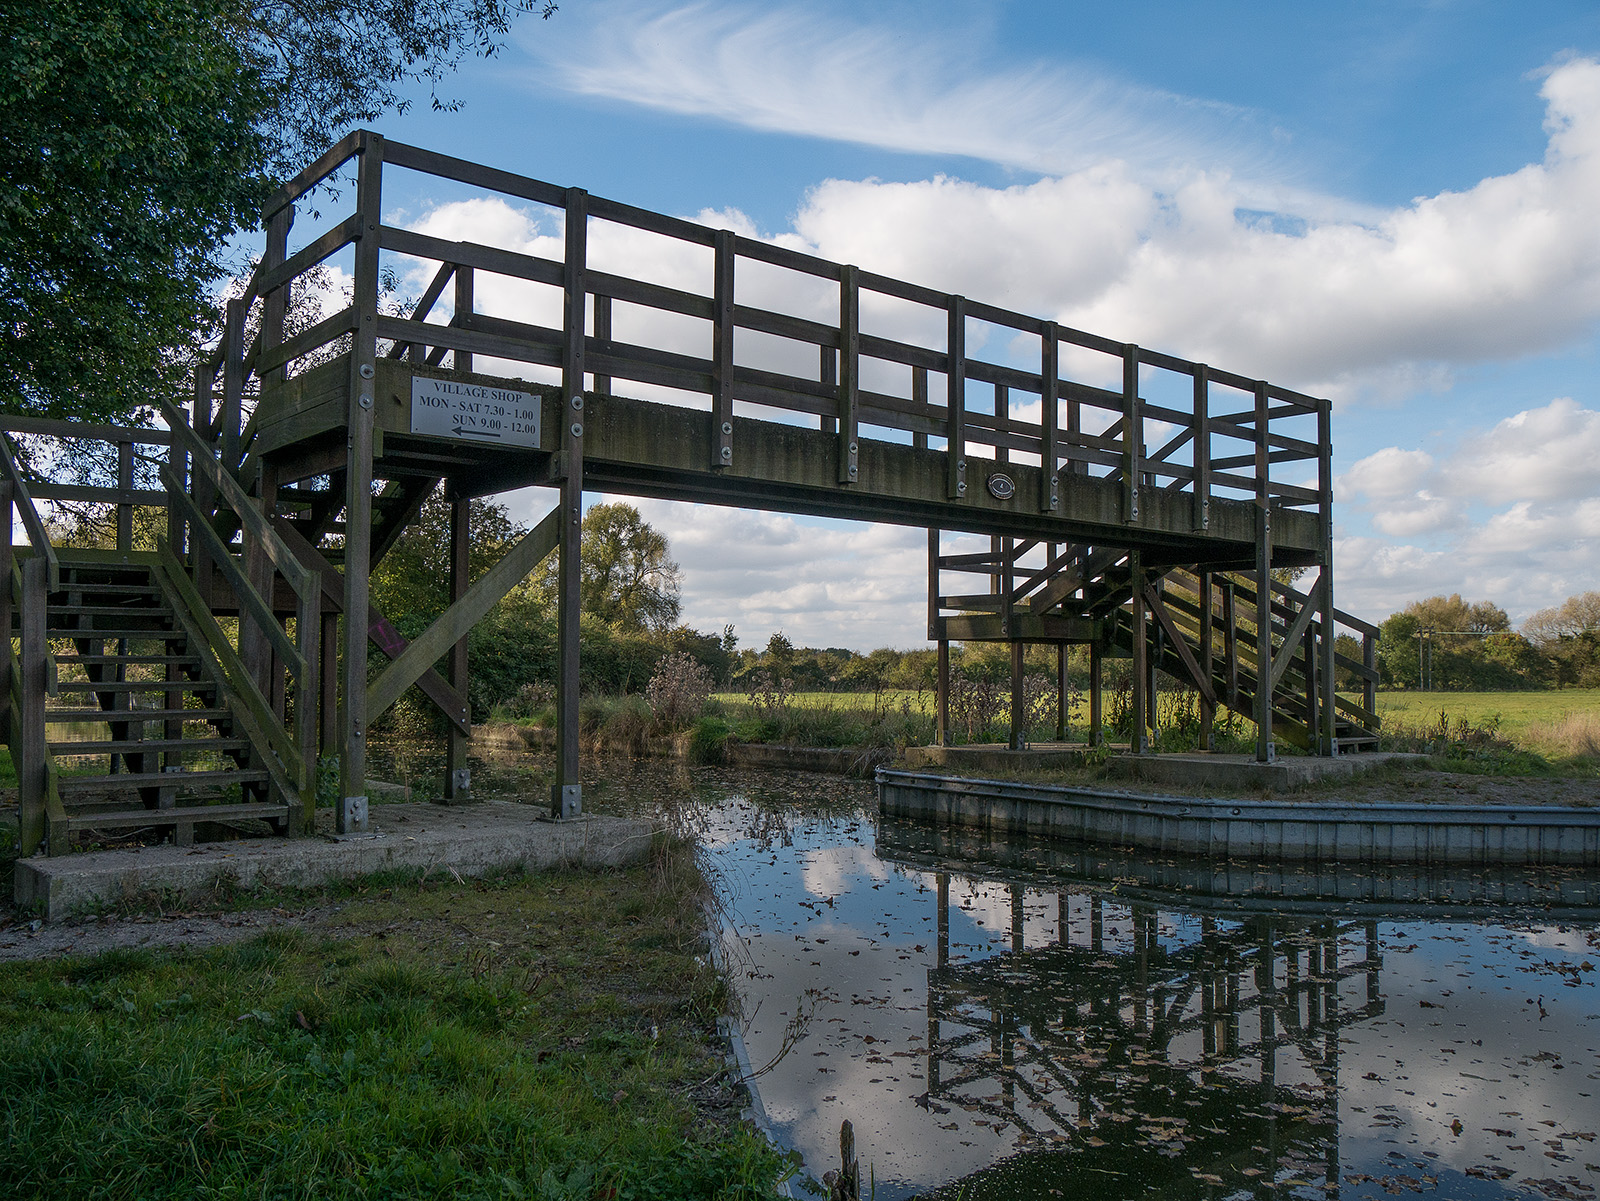 New wooden bridge and a reminder that there is a village nearby.